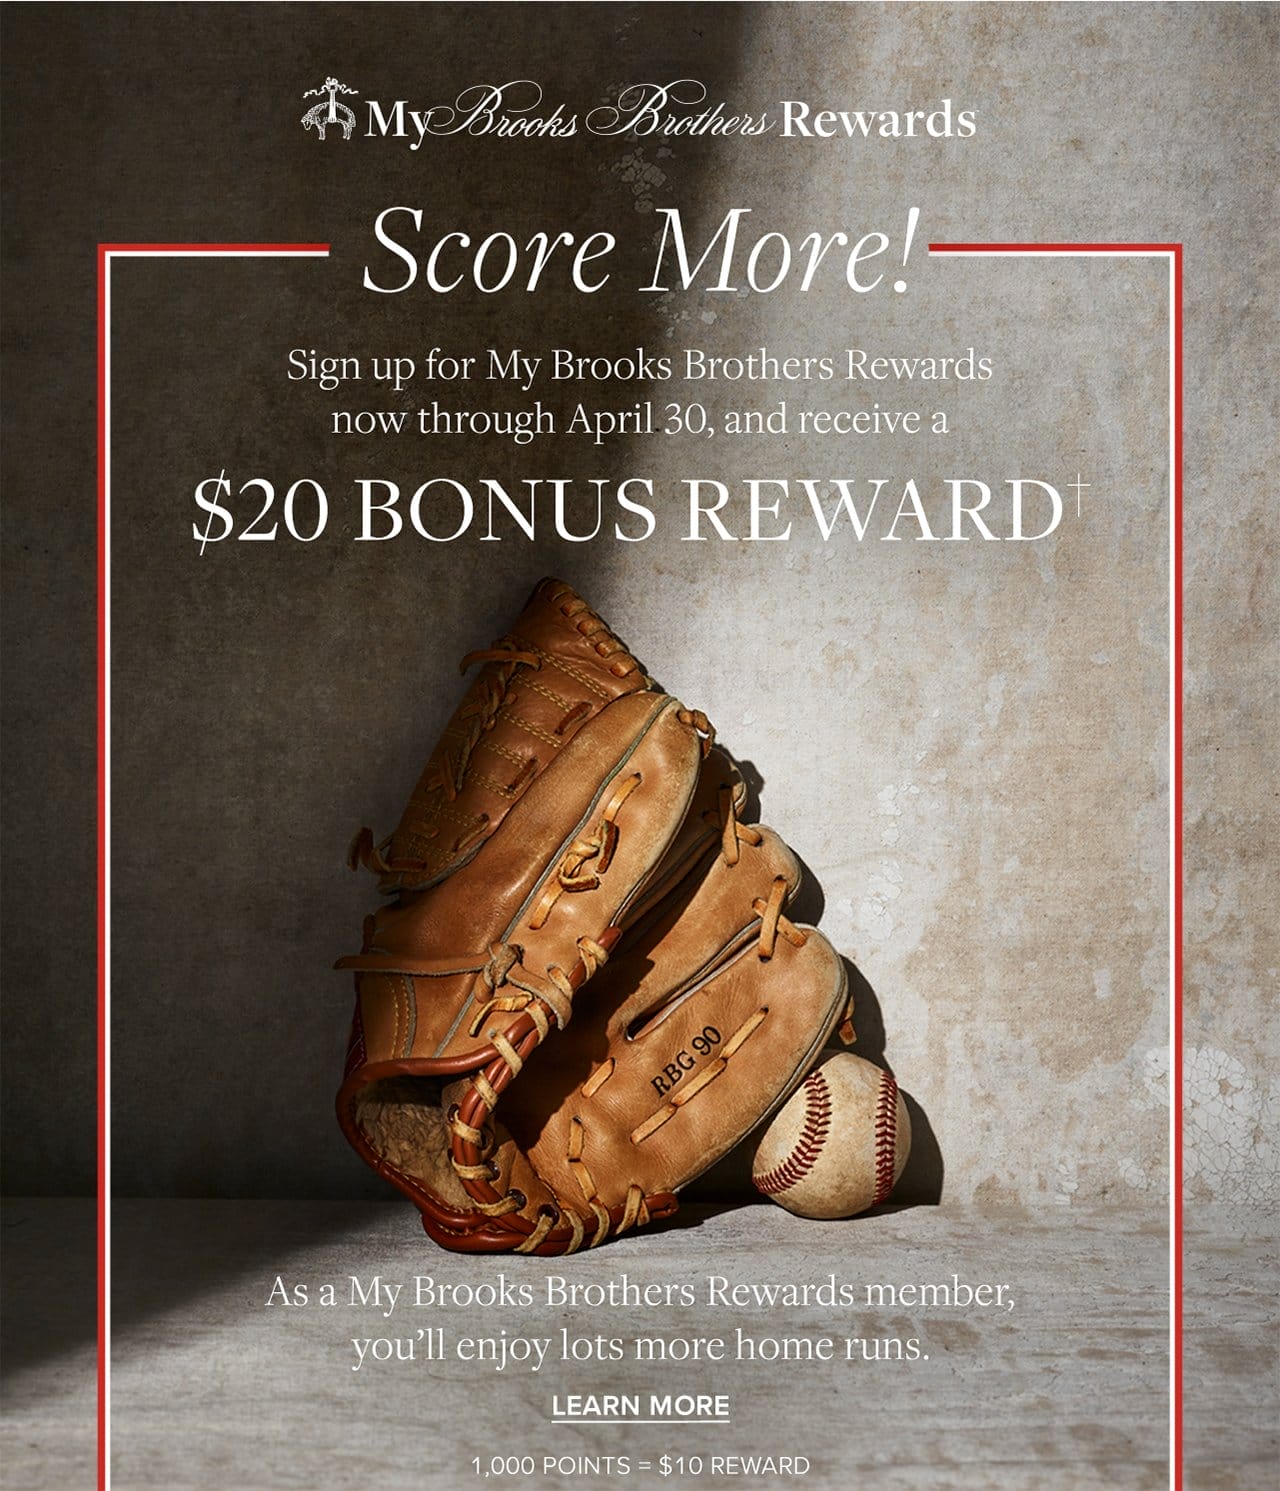 My Brooks Brothers Rewards Score More! Sign up for My Brooks Brothers Rewards now through April 30 and receive a \\$20 Bonus Reward. As a My Brooks Brothers Rewards member, you'll enjoy lots more home runs. Learn More. 1000 Points = \\$10 Reward